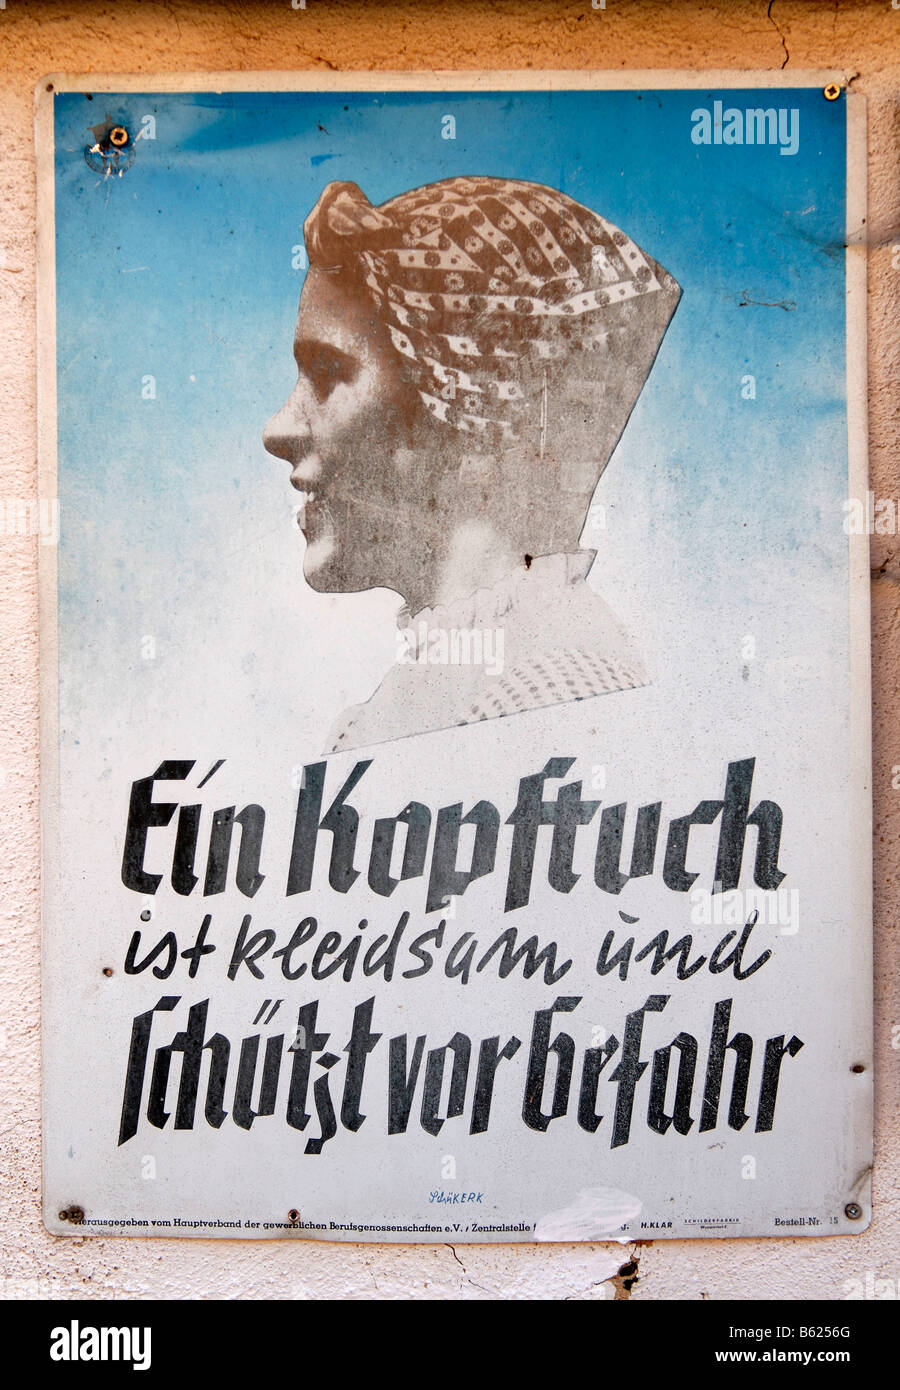 Ein Kopftuch ist kleidsam und schuetzt vor Gefahr, or a headscarf is becoming and protects from danger, a warning sign of the W Stock Photo